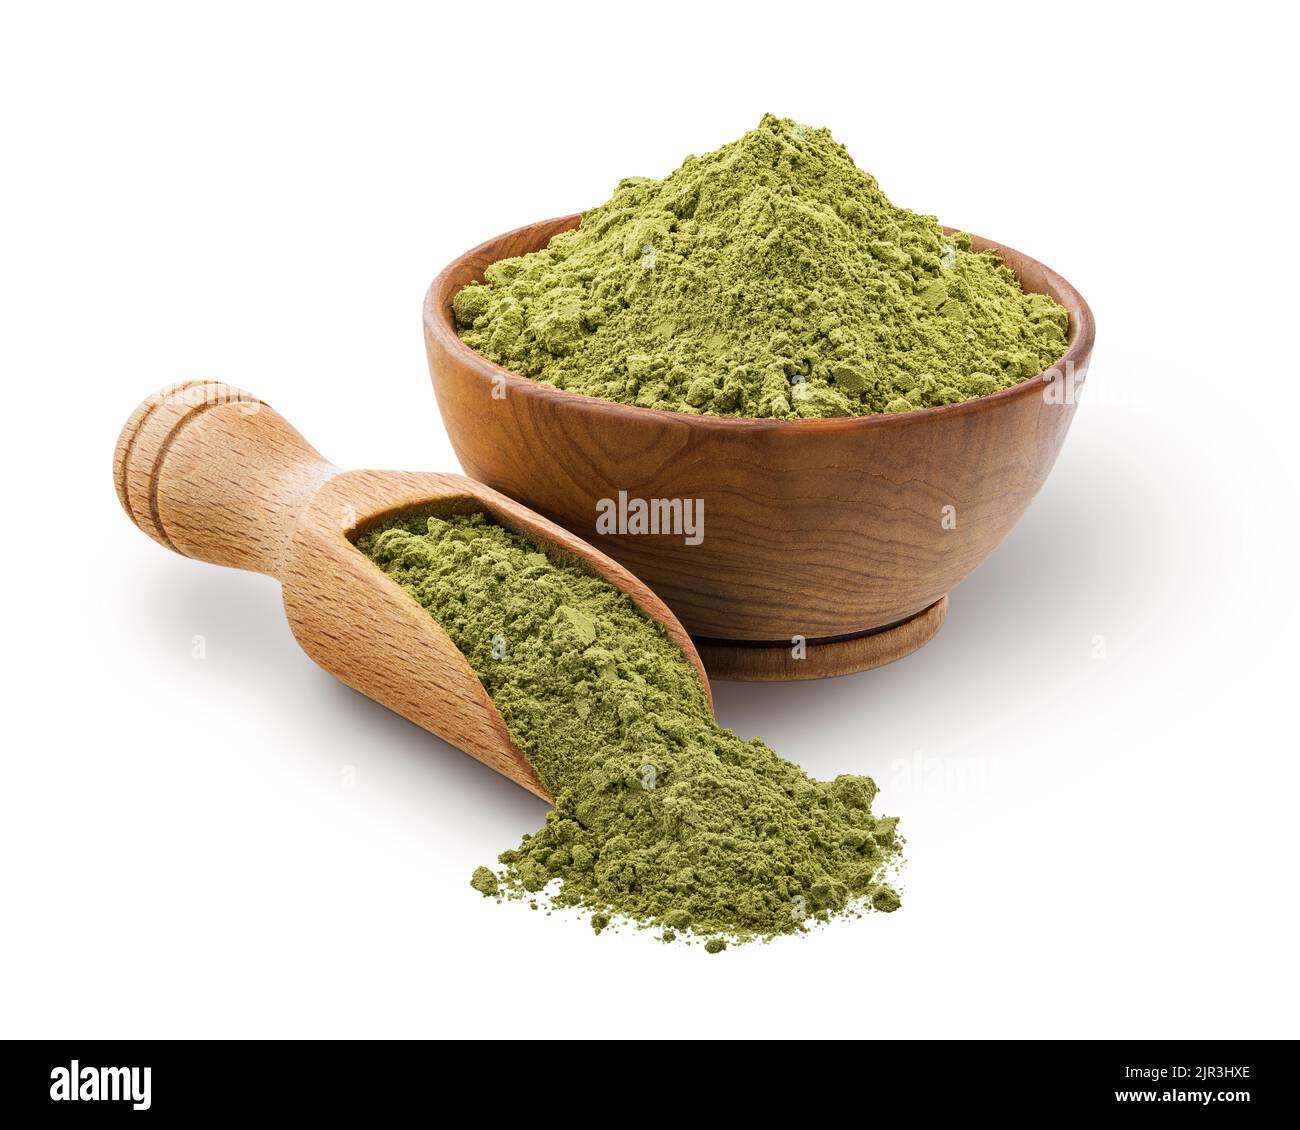 Wooden scoop and bowl full of matcha powder isolated on white Stock Photo